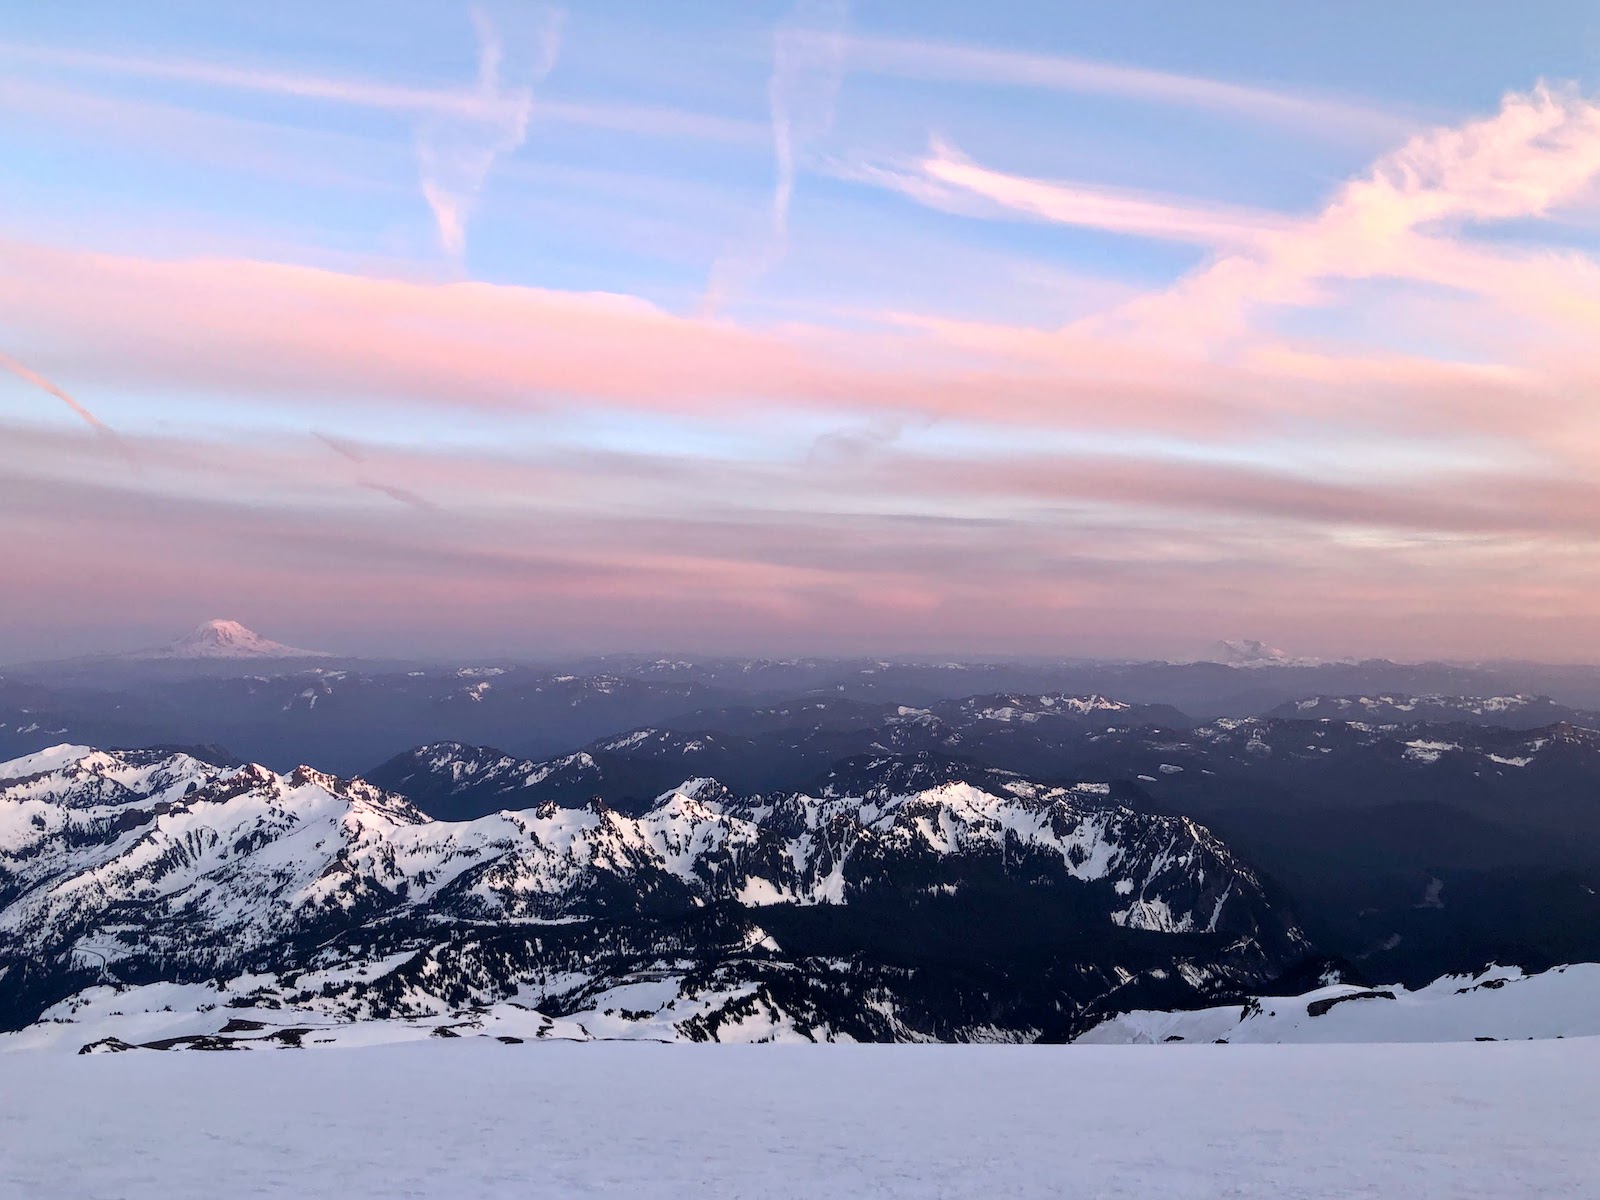 A hazy and beautiful sunset from Camp Muir, with Mount Adams (Pahto) and Mount St Helens (Loowit) in the distance